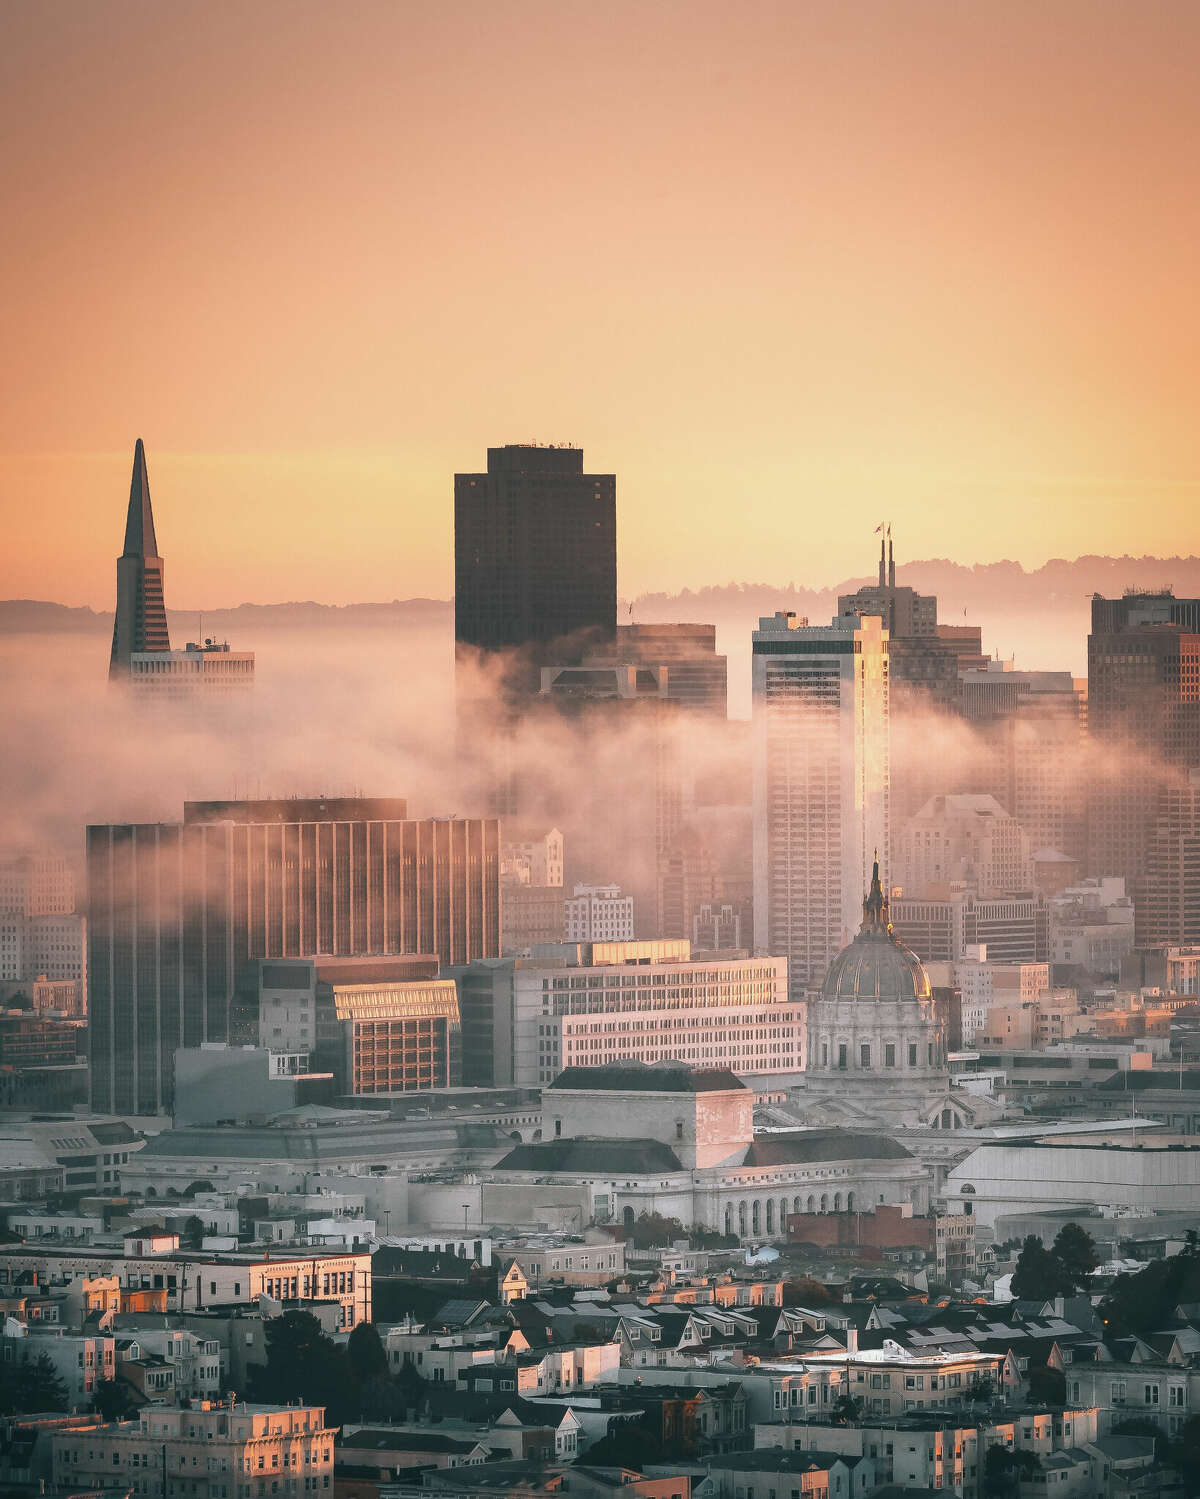 Josh Singh combines San Francisco's natural beauty with human elements in his photographs showcased on his Instagram page @josh7185.